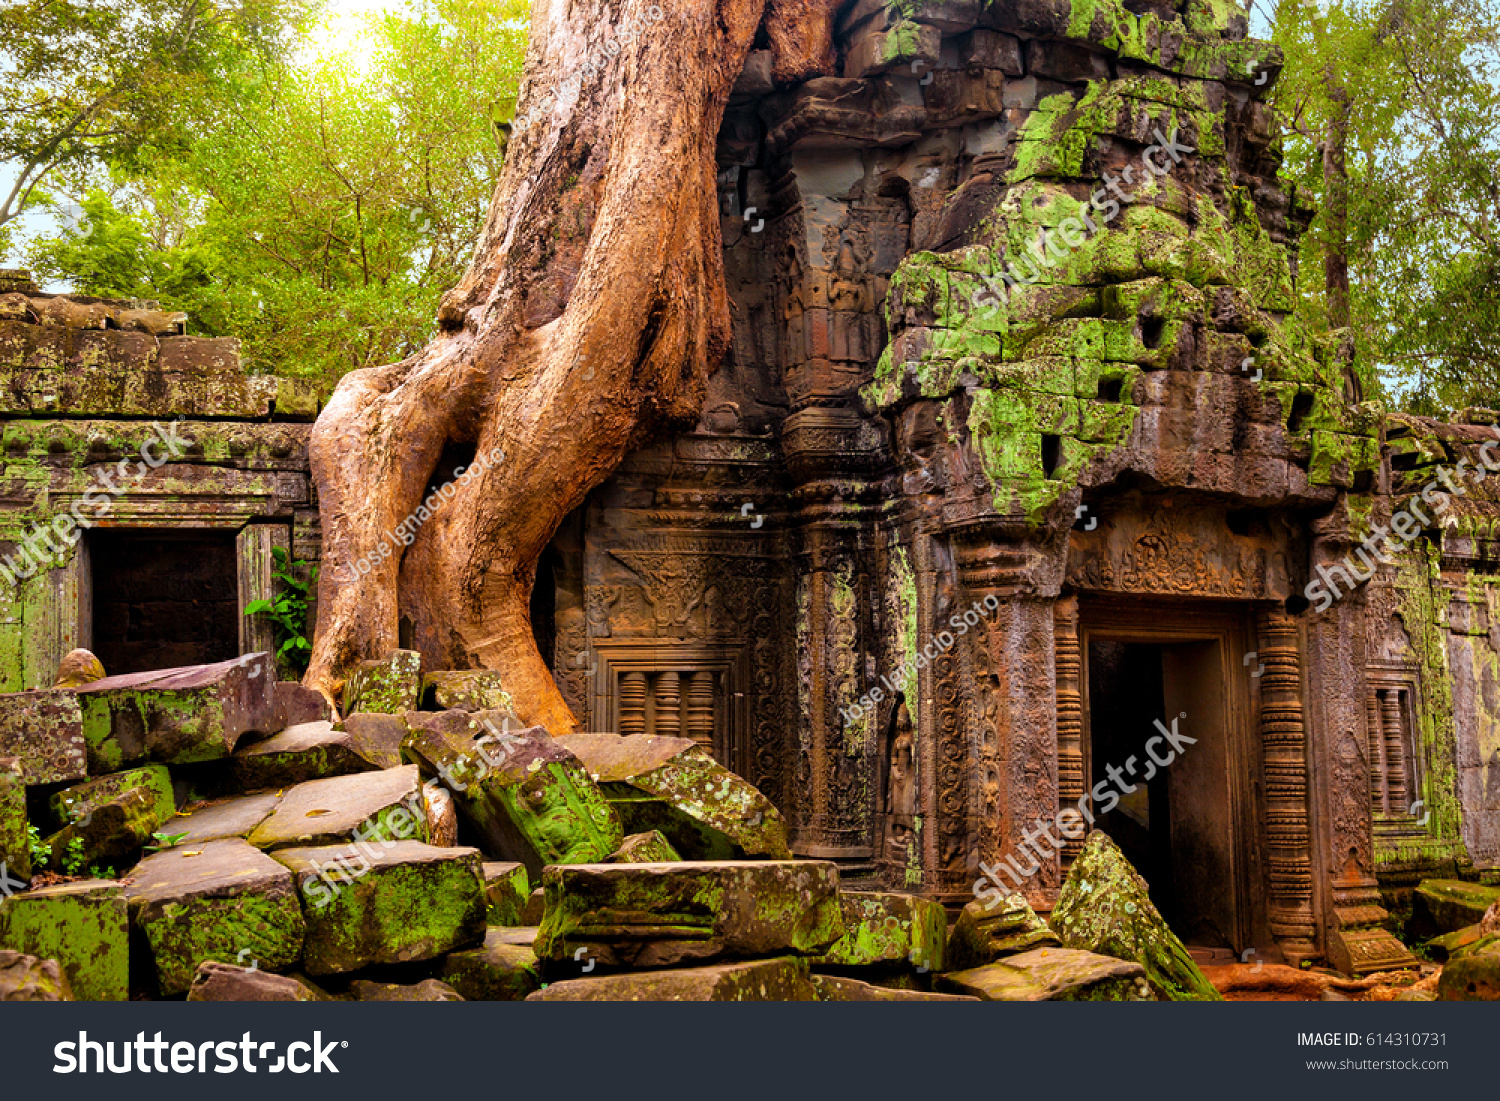 Ta Prohm temple. Ancient Khmer architecture under the giant roots of a tree at Angkor Wat complex, Siem Reap, Cambodia. #614310731